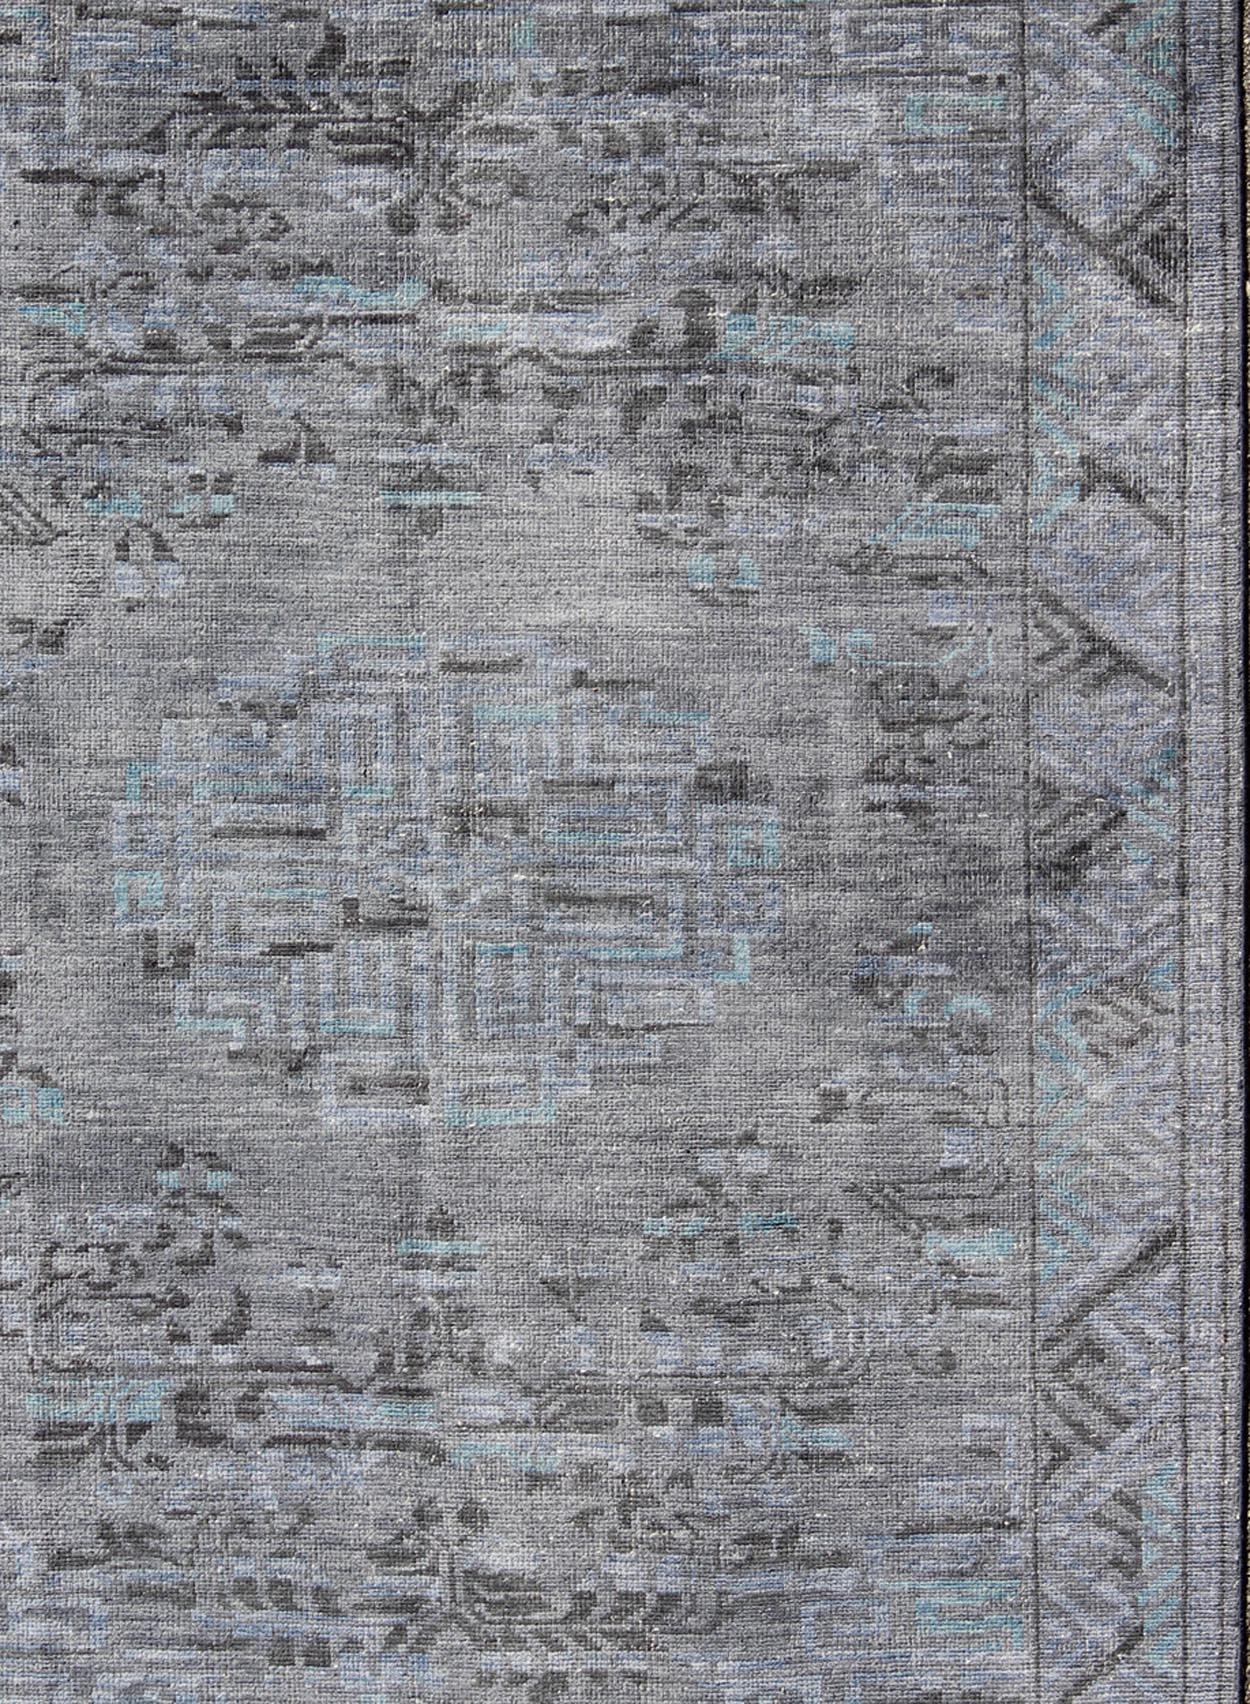 Khotan design modern rug with blue, gray, brown and charcoal and center medallion design, Keivan Woven Arts/ rug/ OB-9516698, country of origin / type: Khotan

This hand knotted Khotan rug features a beautiful center medallion design rendered in